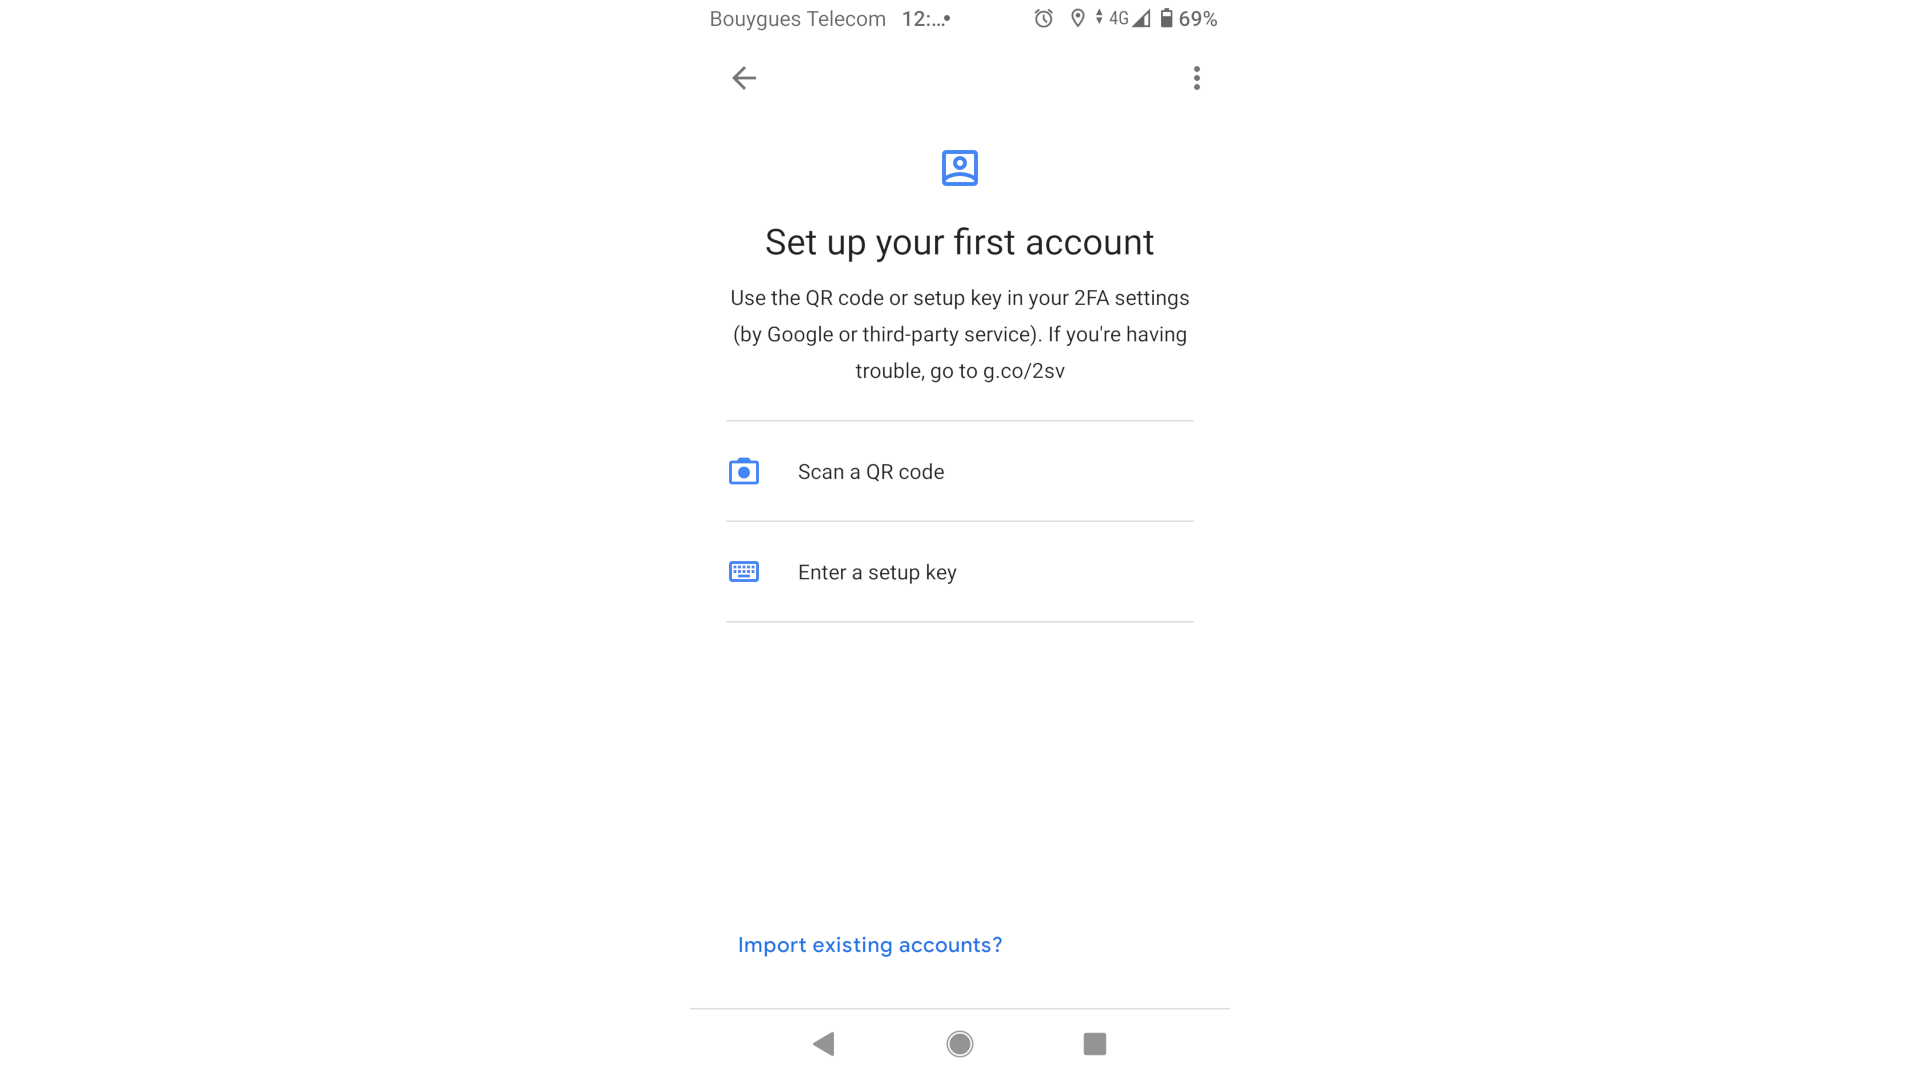 Google Authenticator prompts you to set up your first account